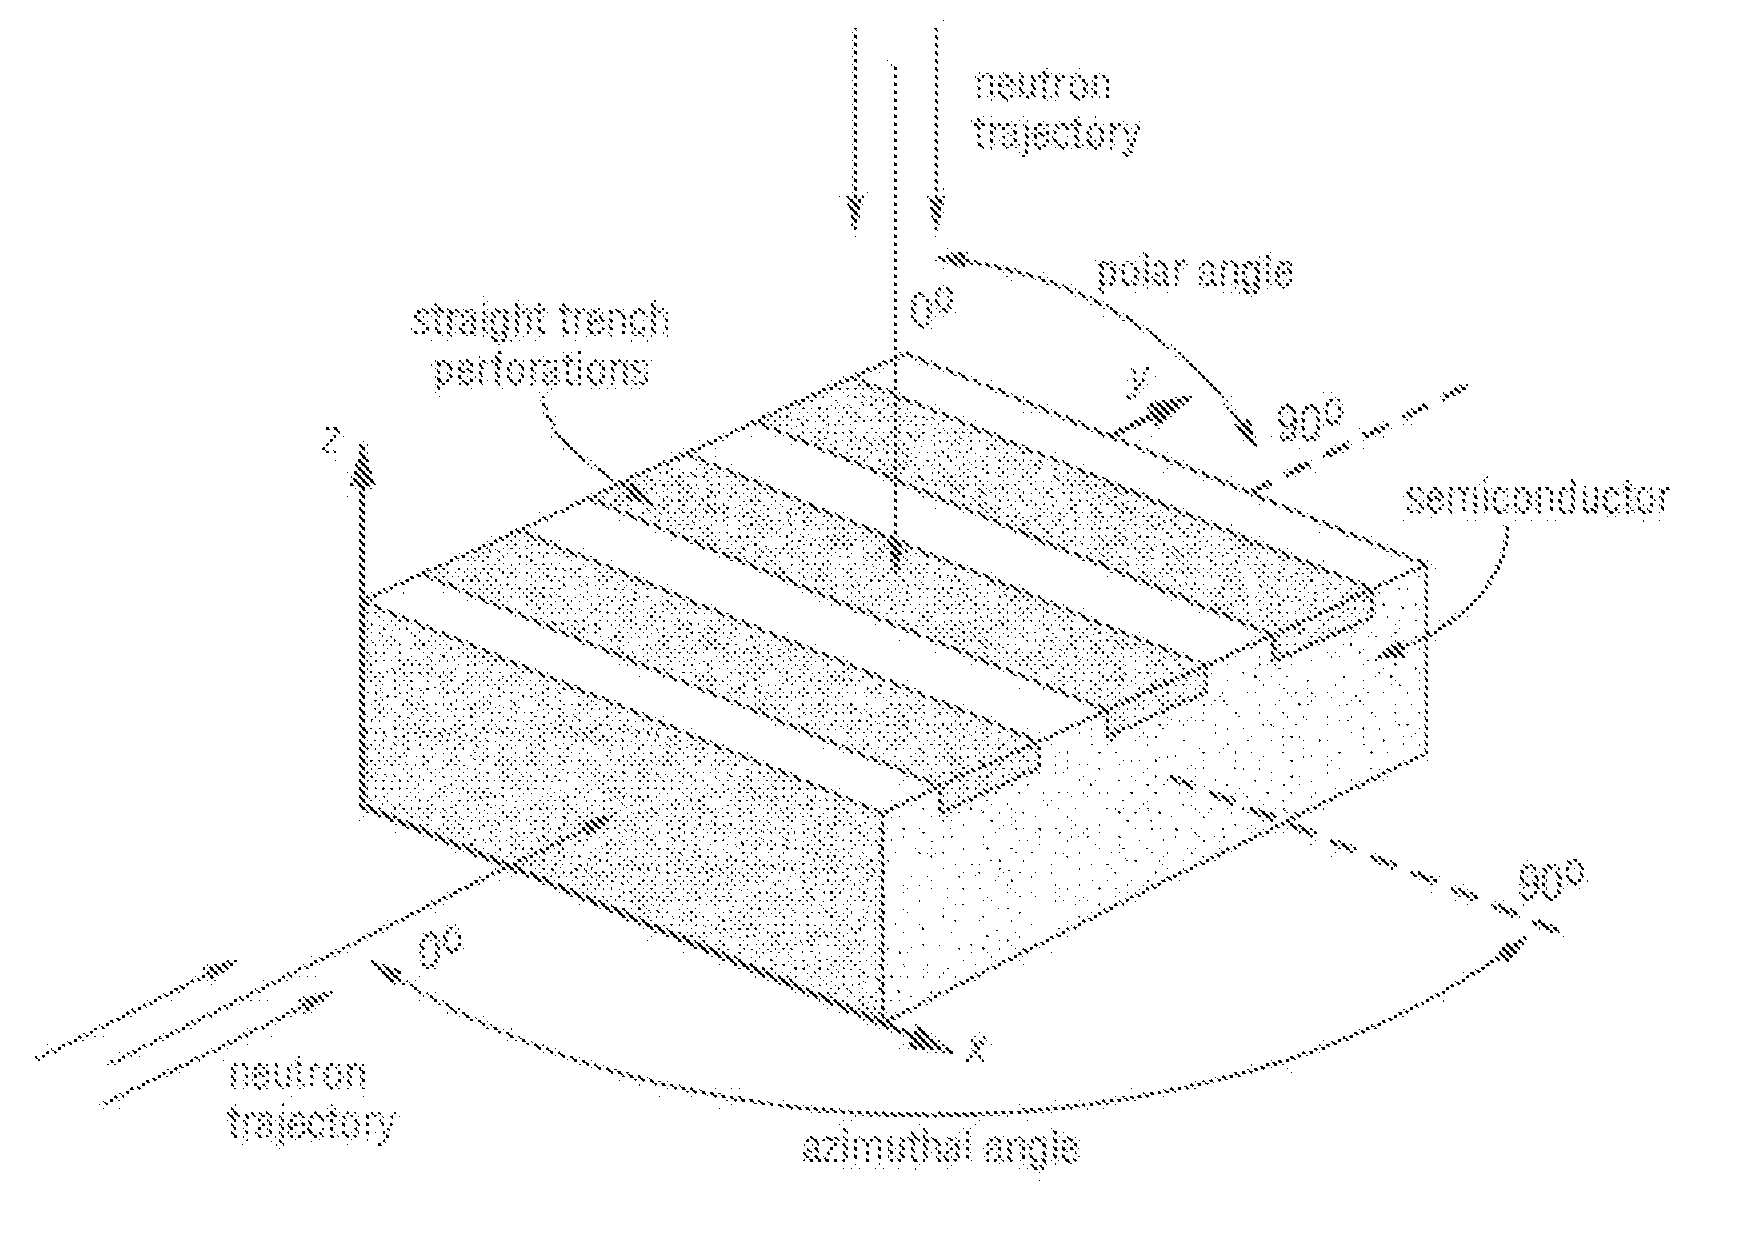 Non-streaming high-efficiency perforated semiconductor neutron detectors, methods of making same and measuring wand and detector modules utilzing same